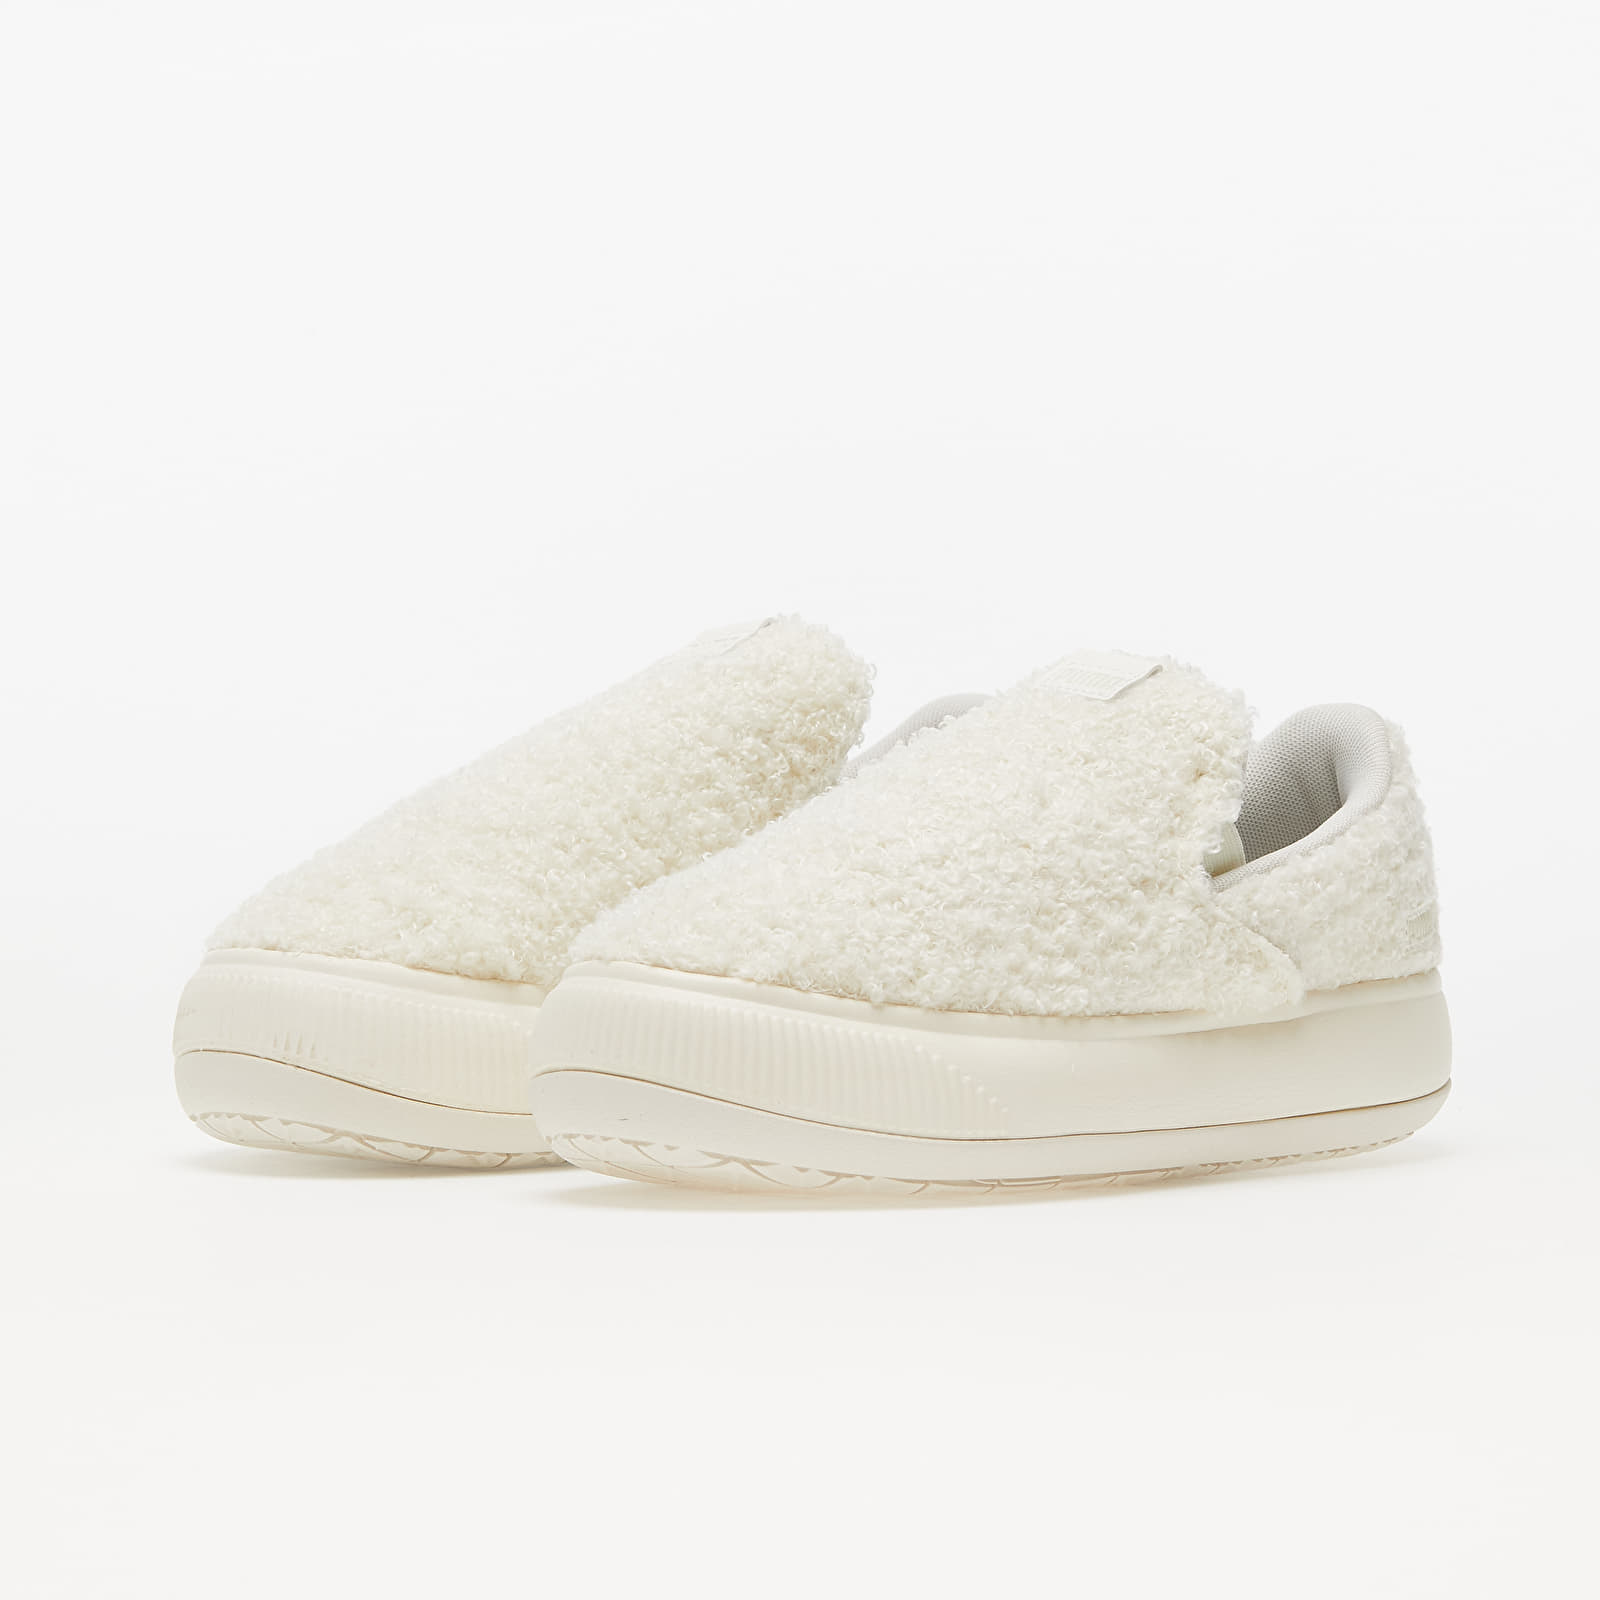 Women's sneakers and shoes Puma Suede Mayu Slip-on Teddy 